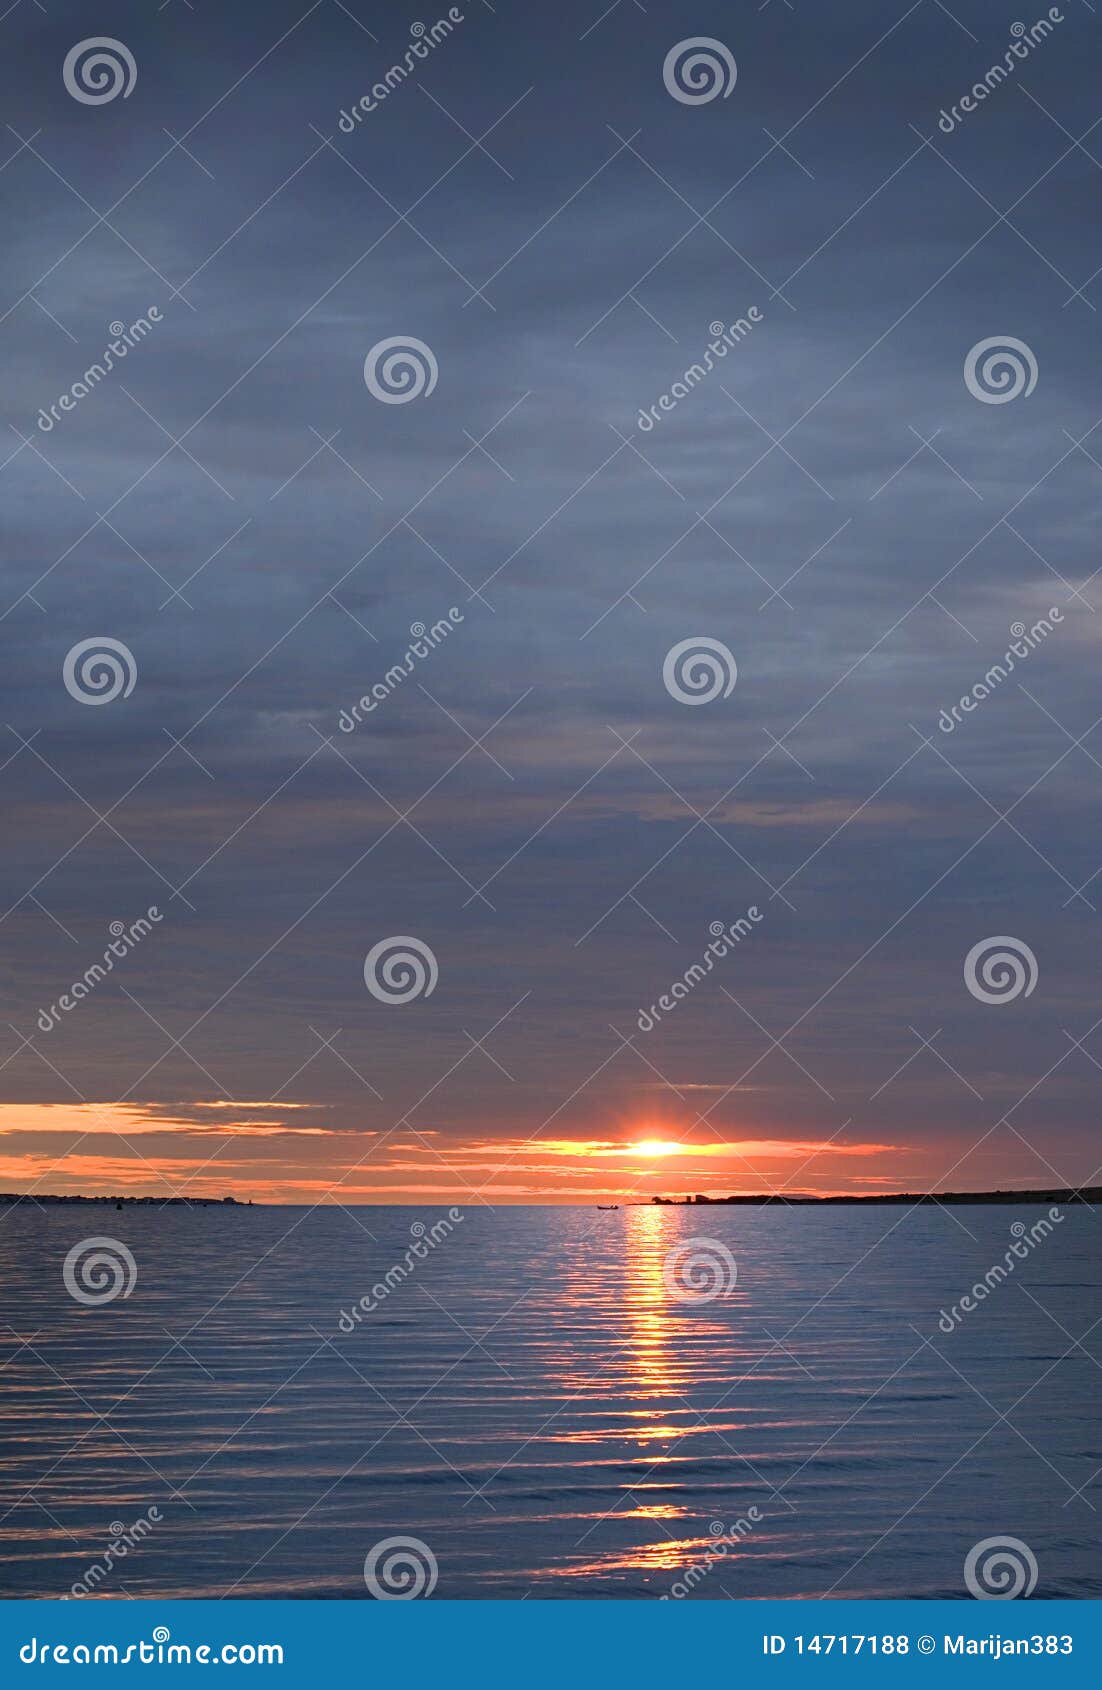 Sun with waves stock photo. Image of climate, coastline - 14717188